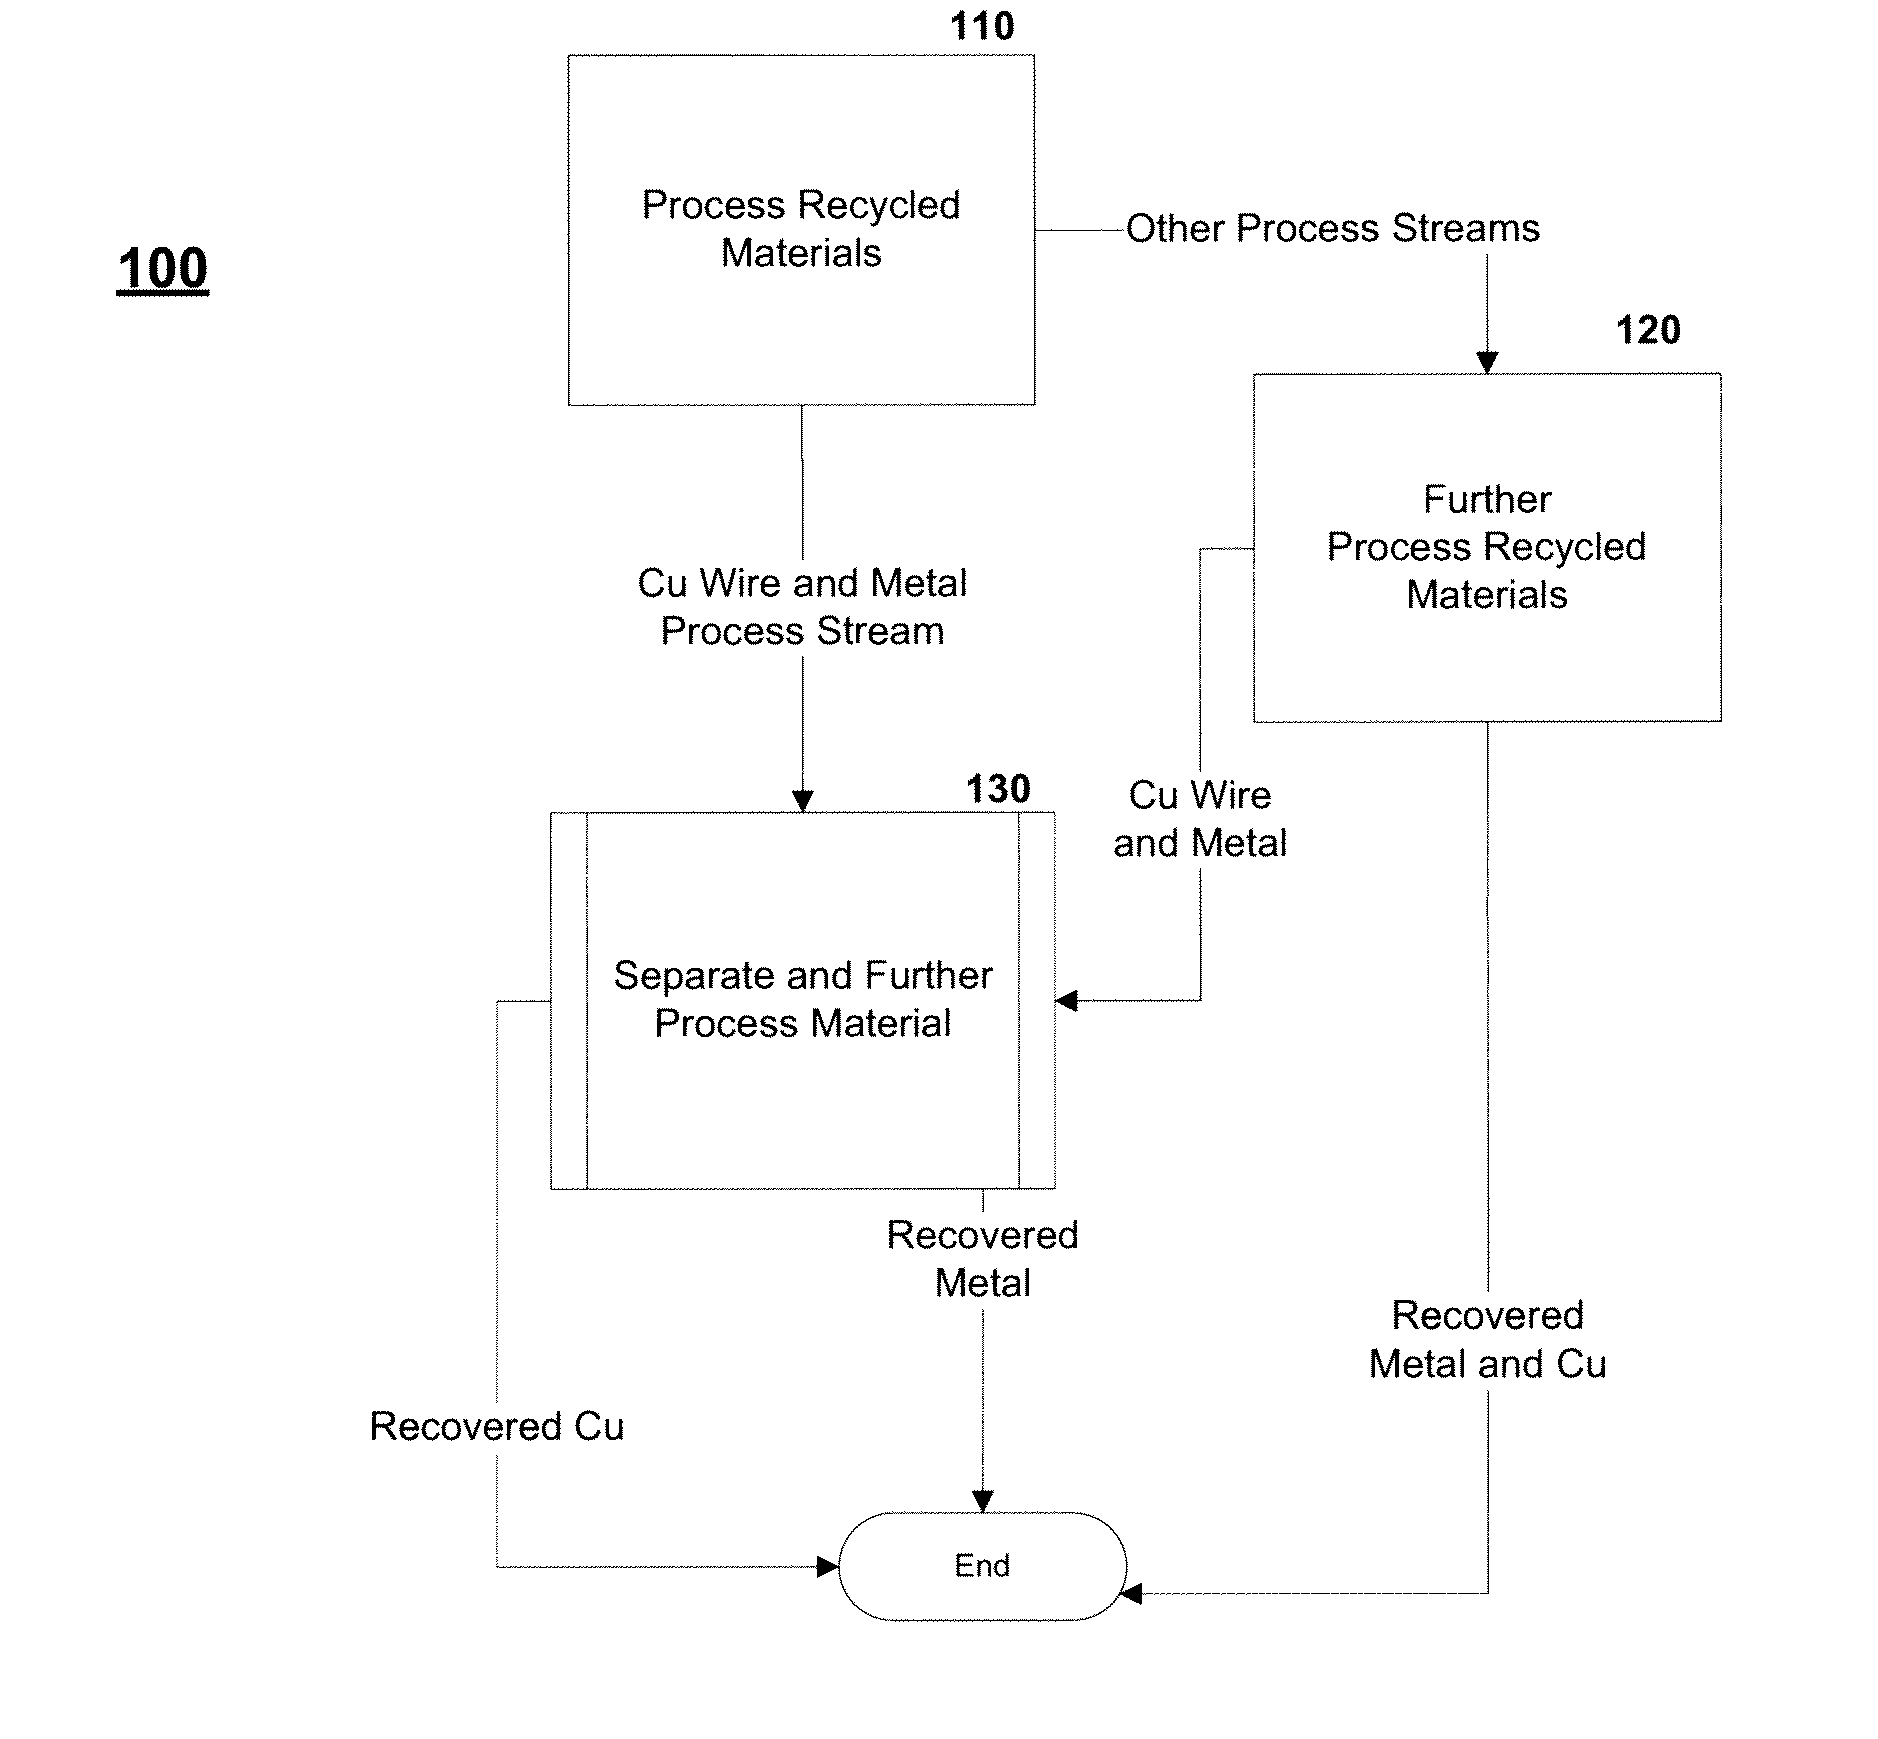 Method and System For Separating and Recovering Wire and Other Metal from Processed Recycled Materials